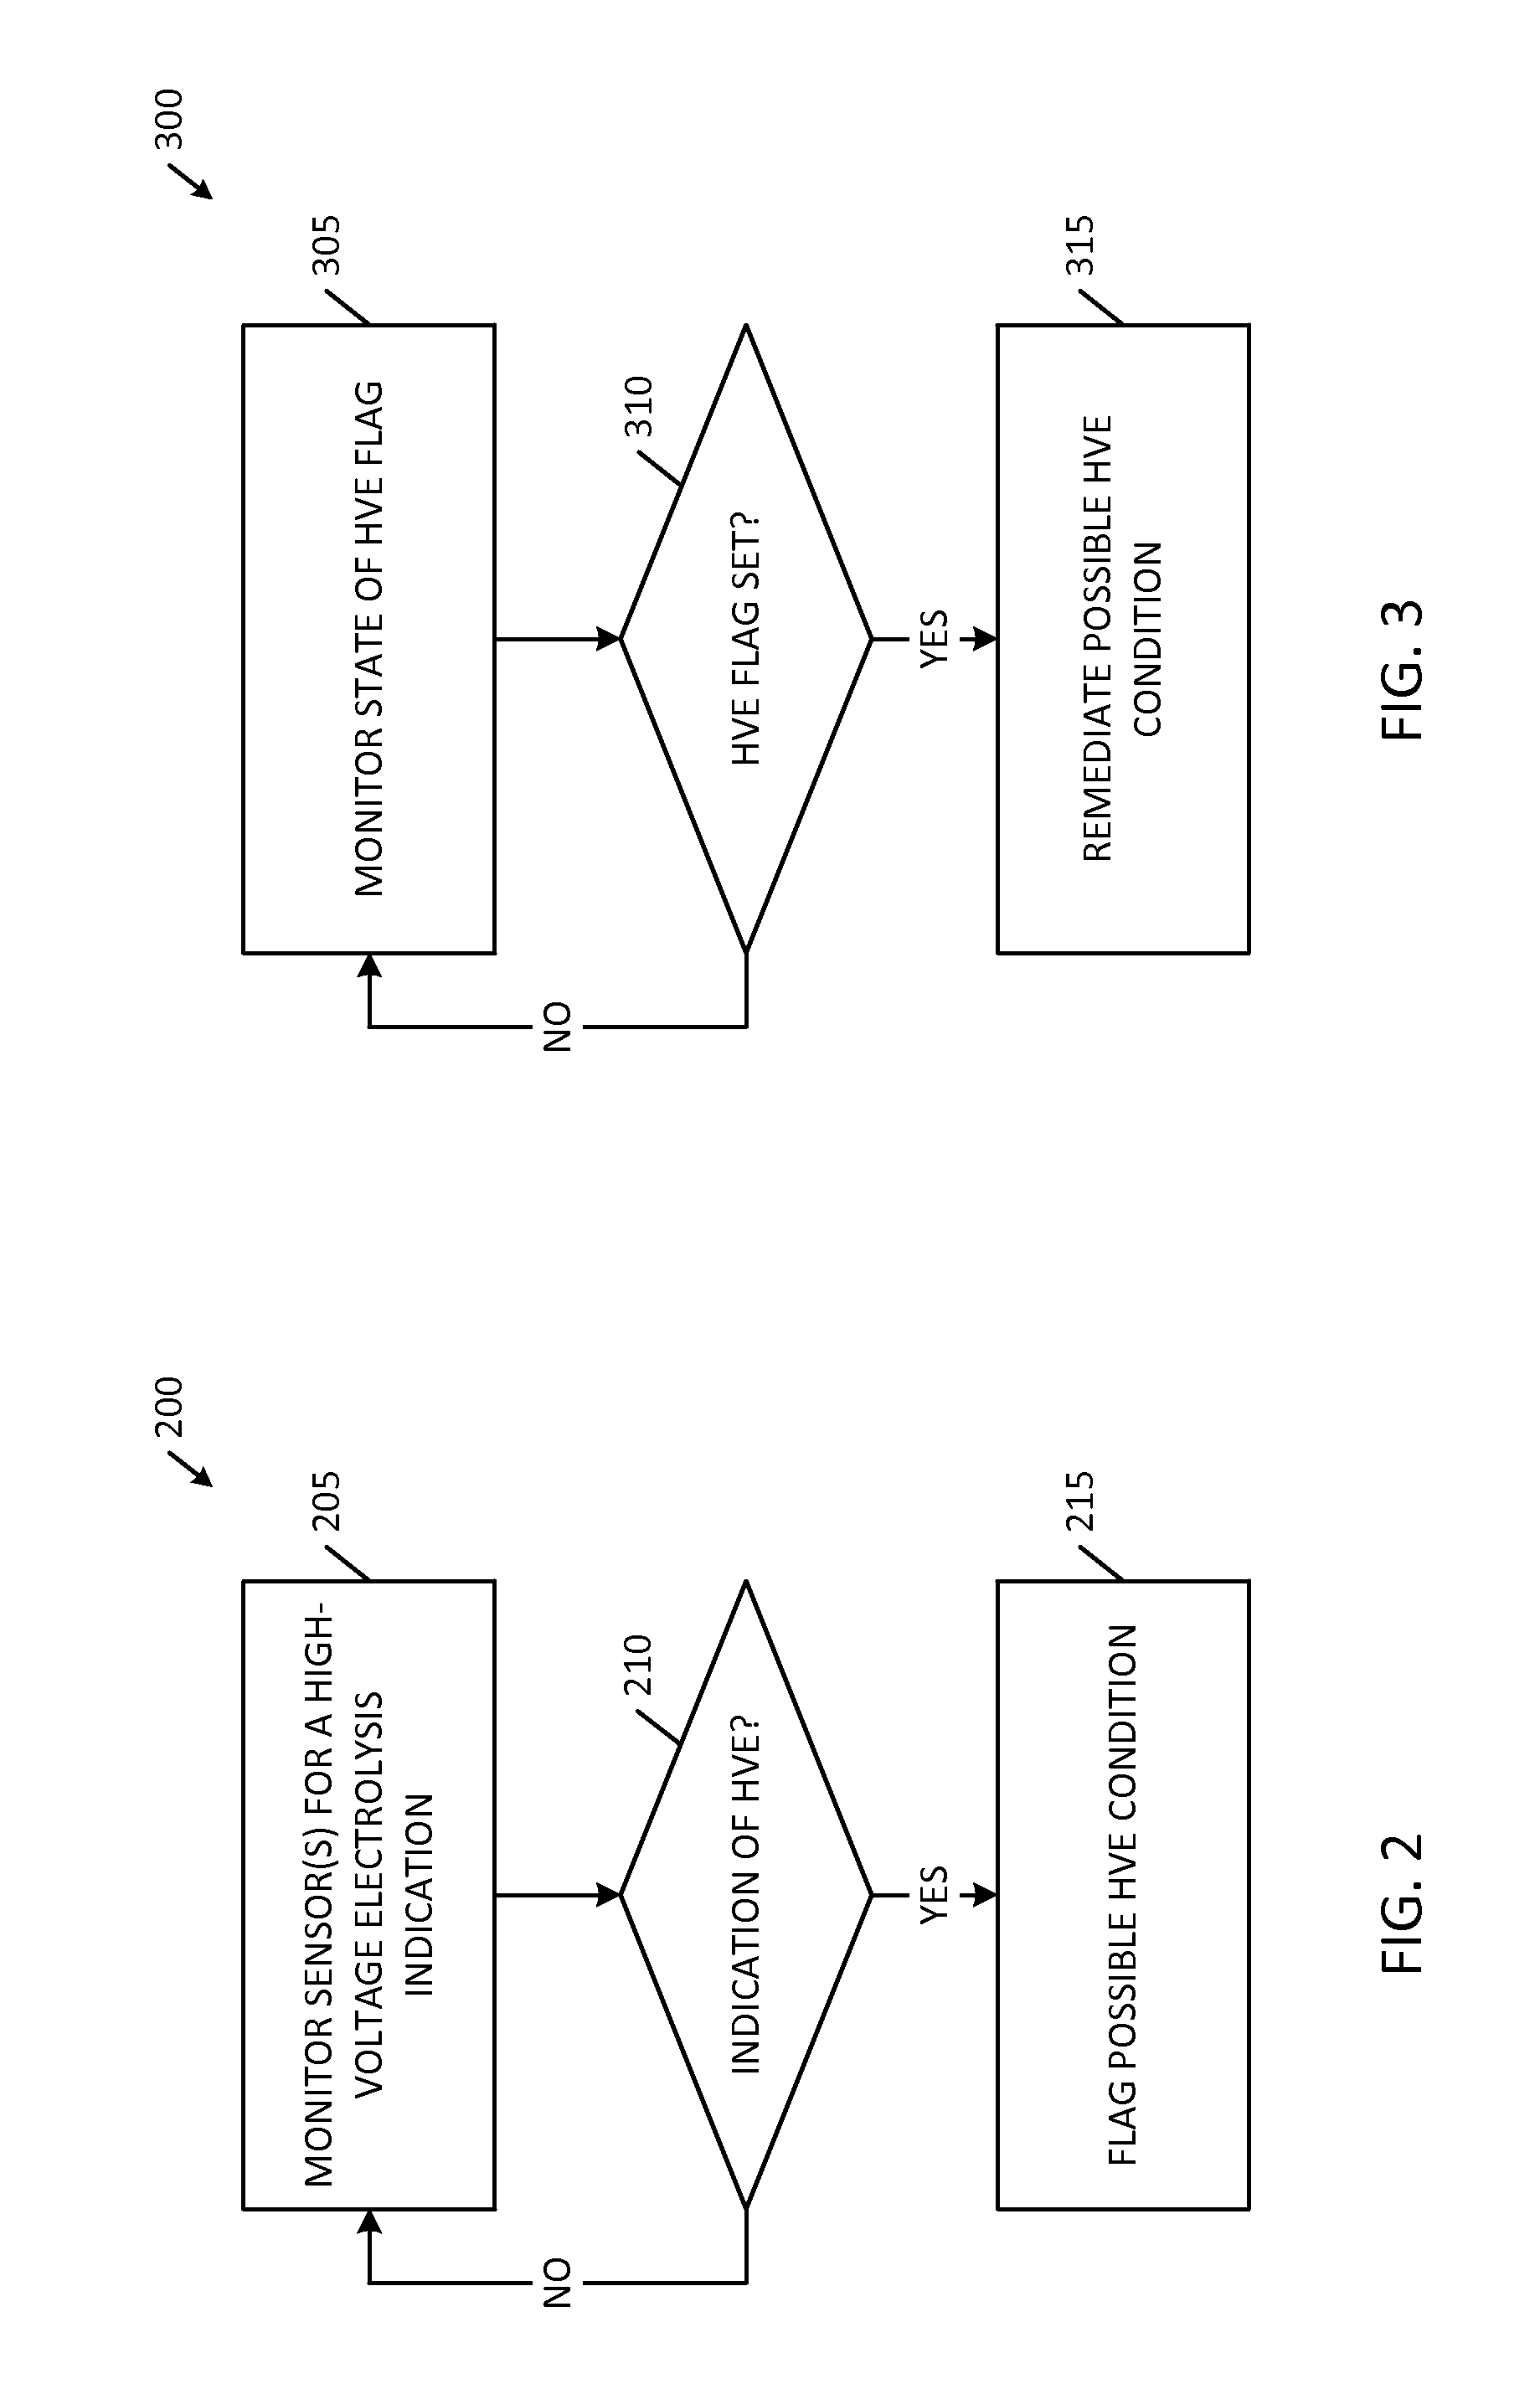 Detection of high voltage electrolysis of coolant in a battery pack